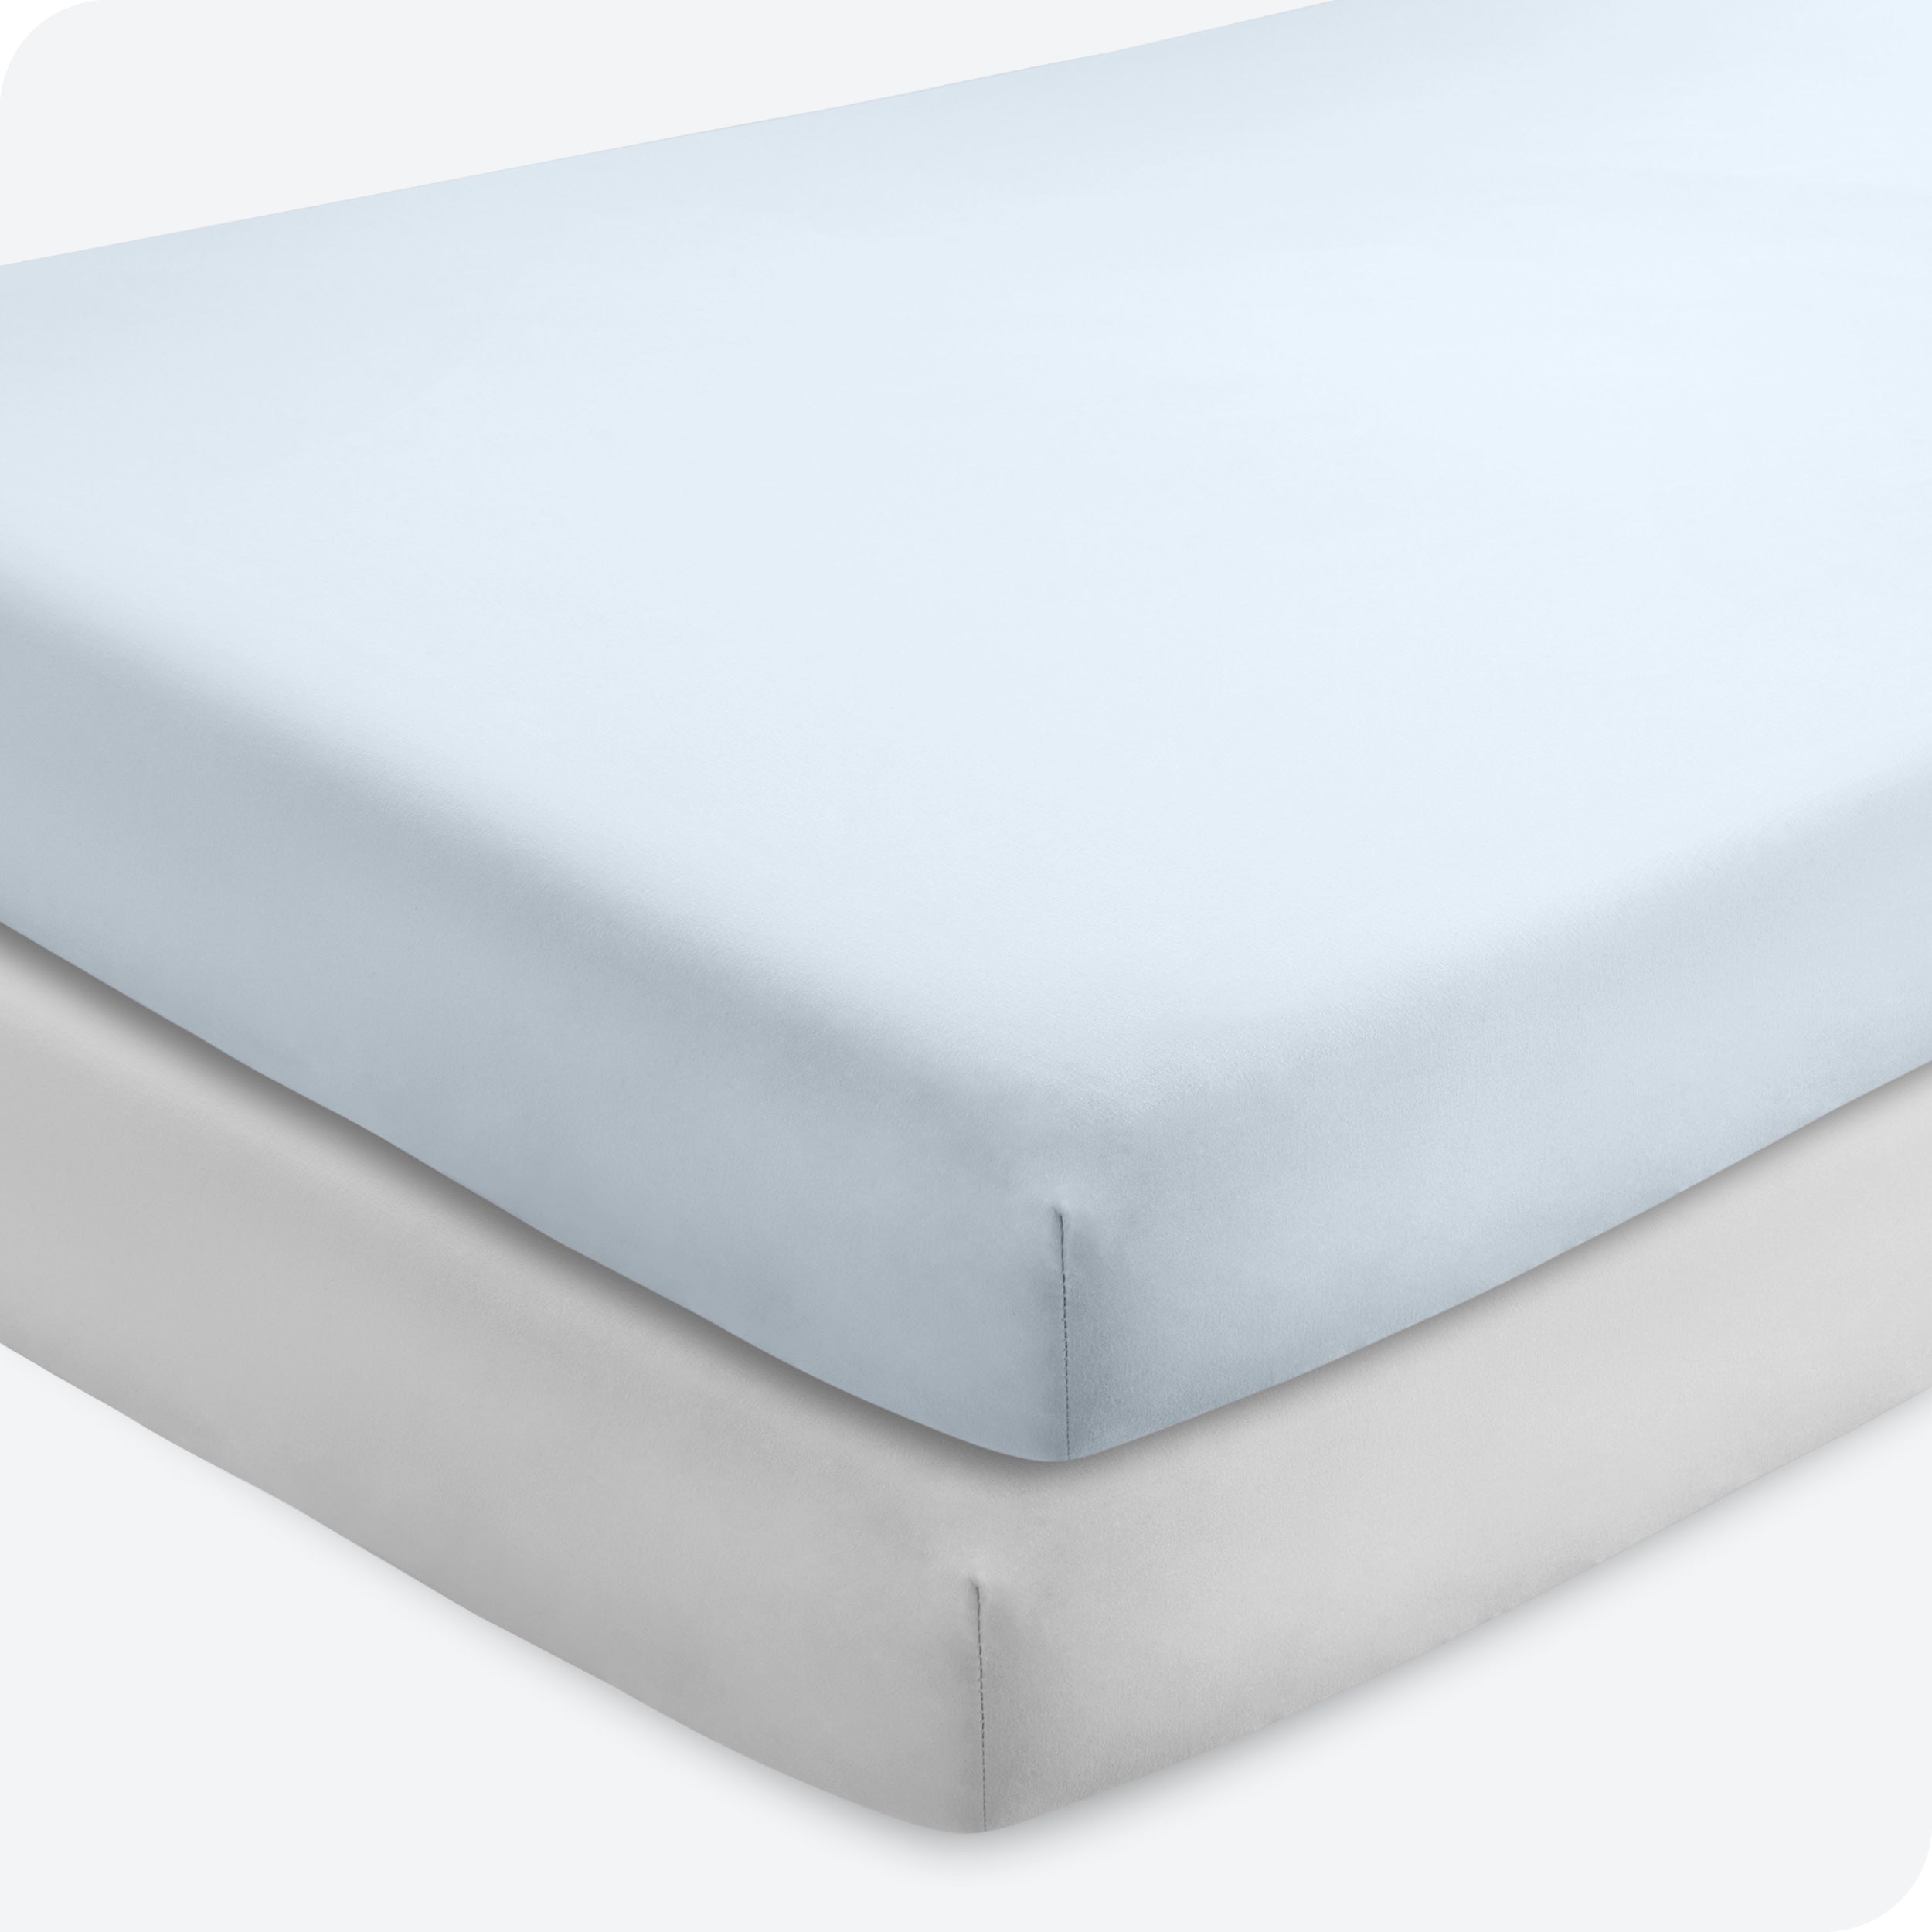 Two crib mattresses stacked with fitted sheets on them